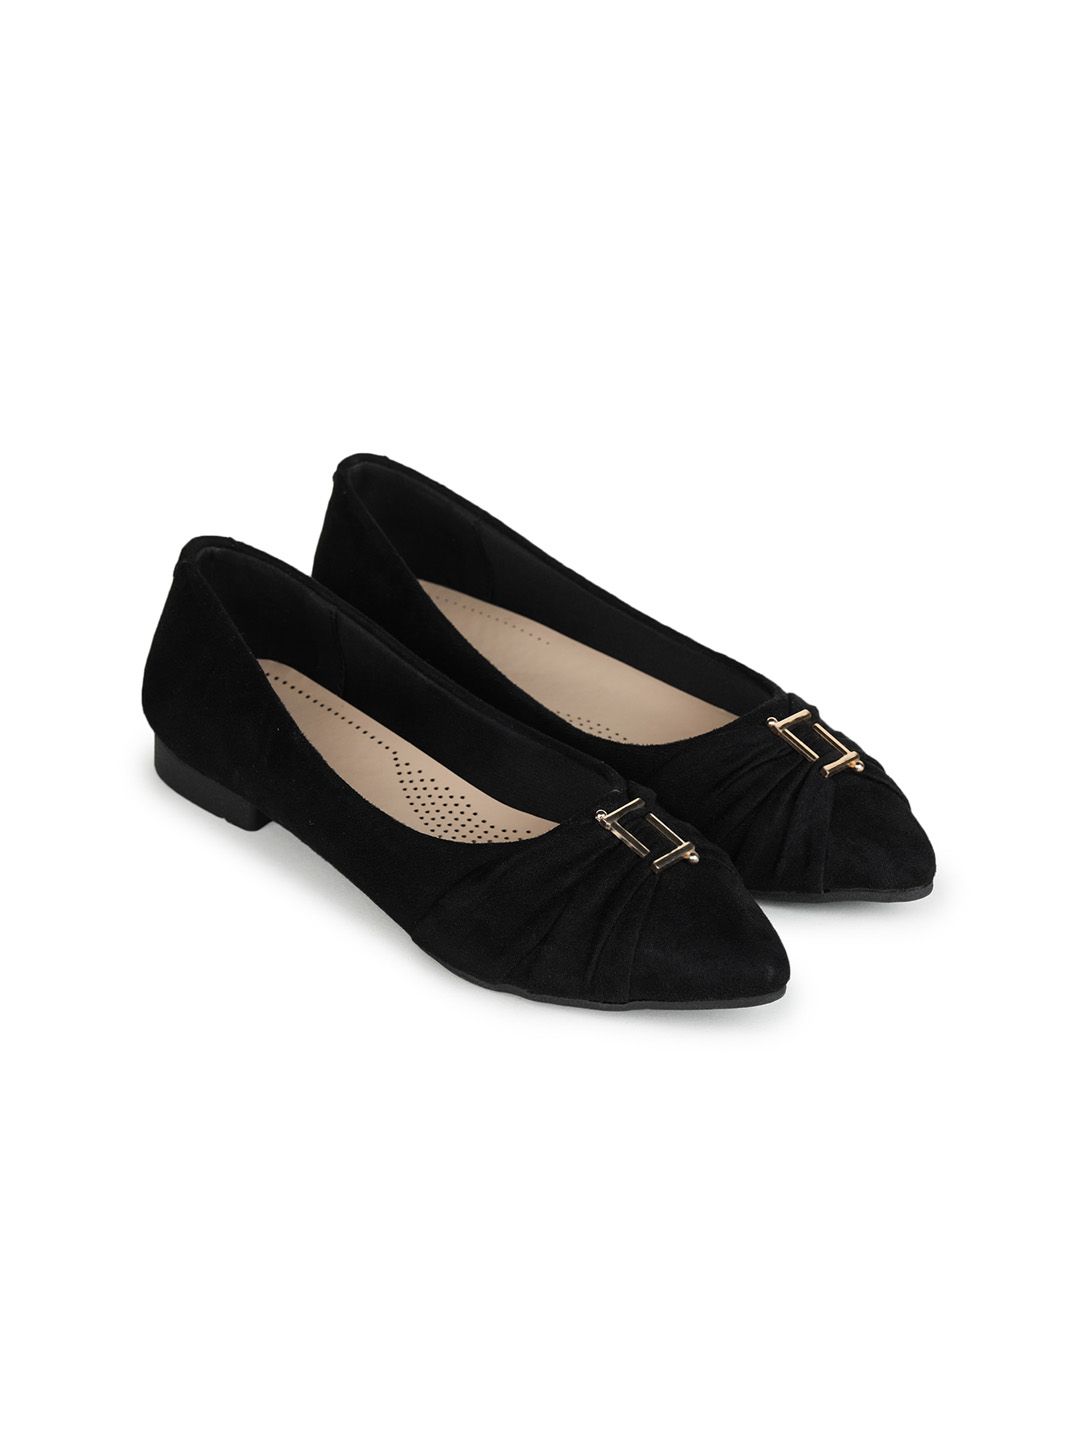 Shezone Women Black Ballerinas with Bows Flats Price in India